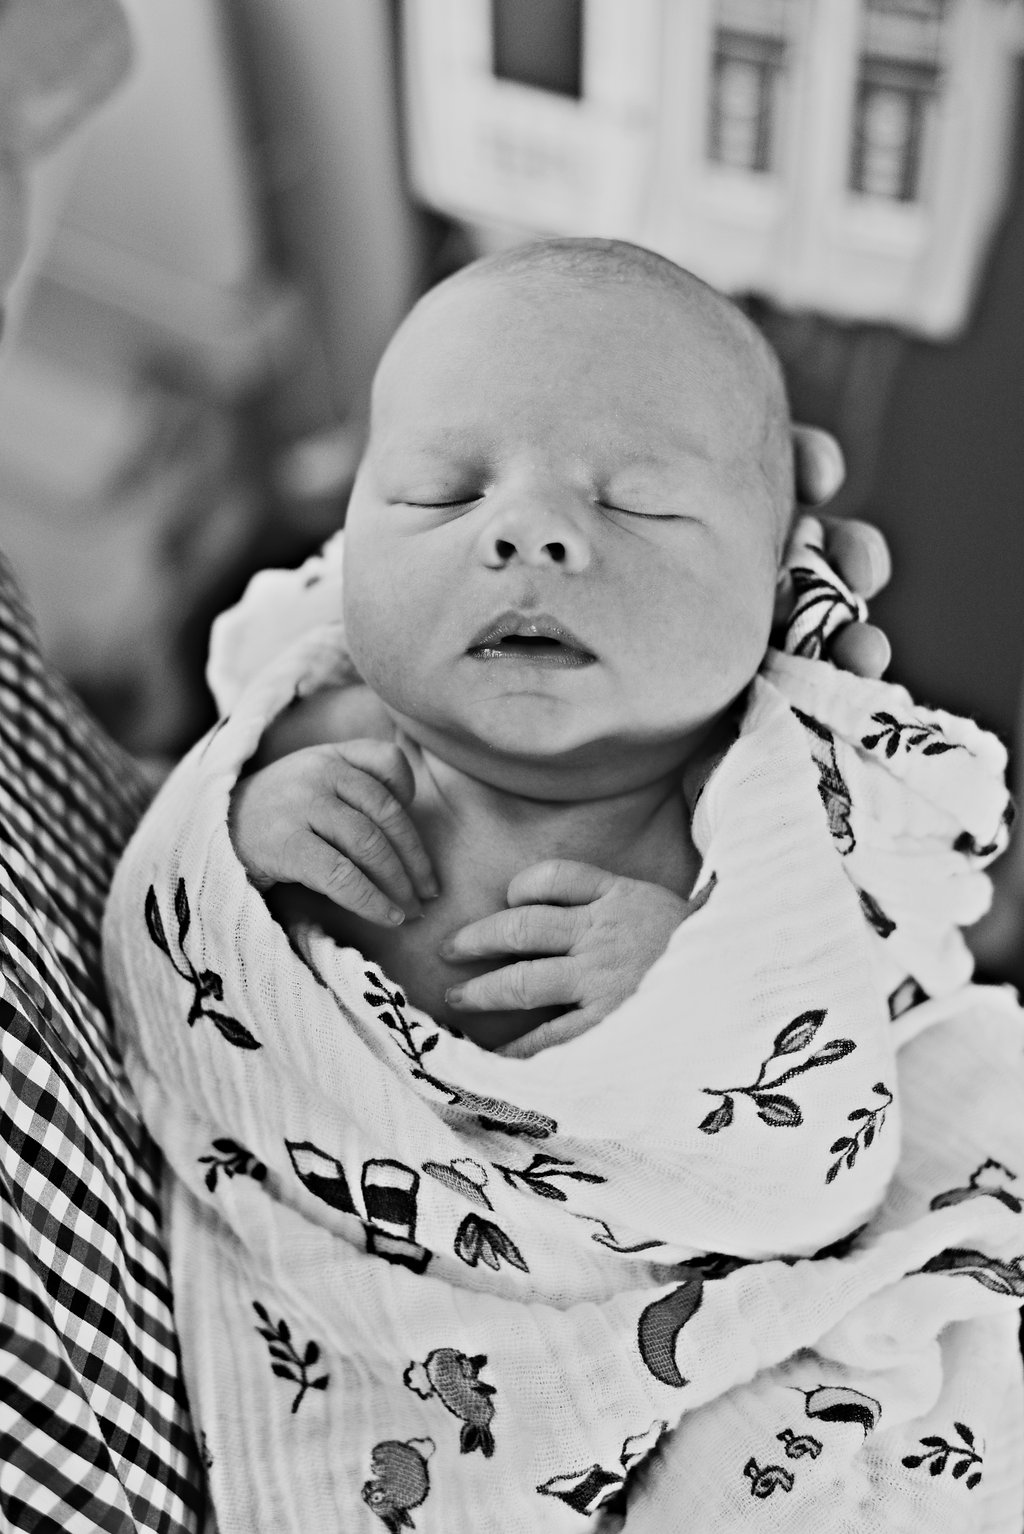 Mack’s Birth Story: Told in Hospital Photos